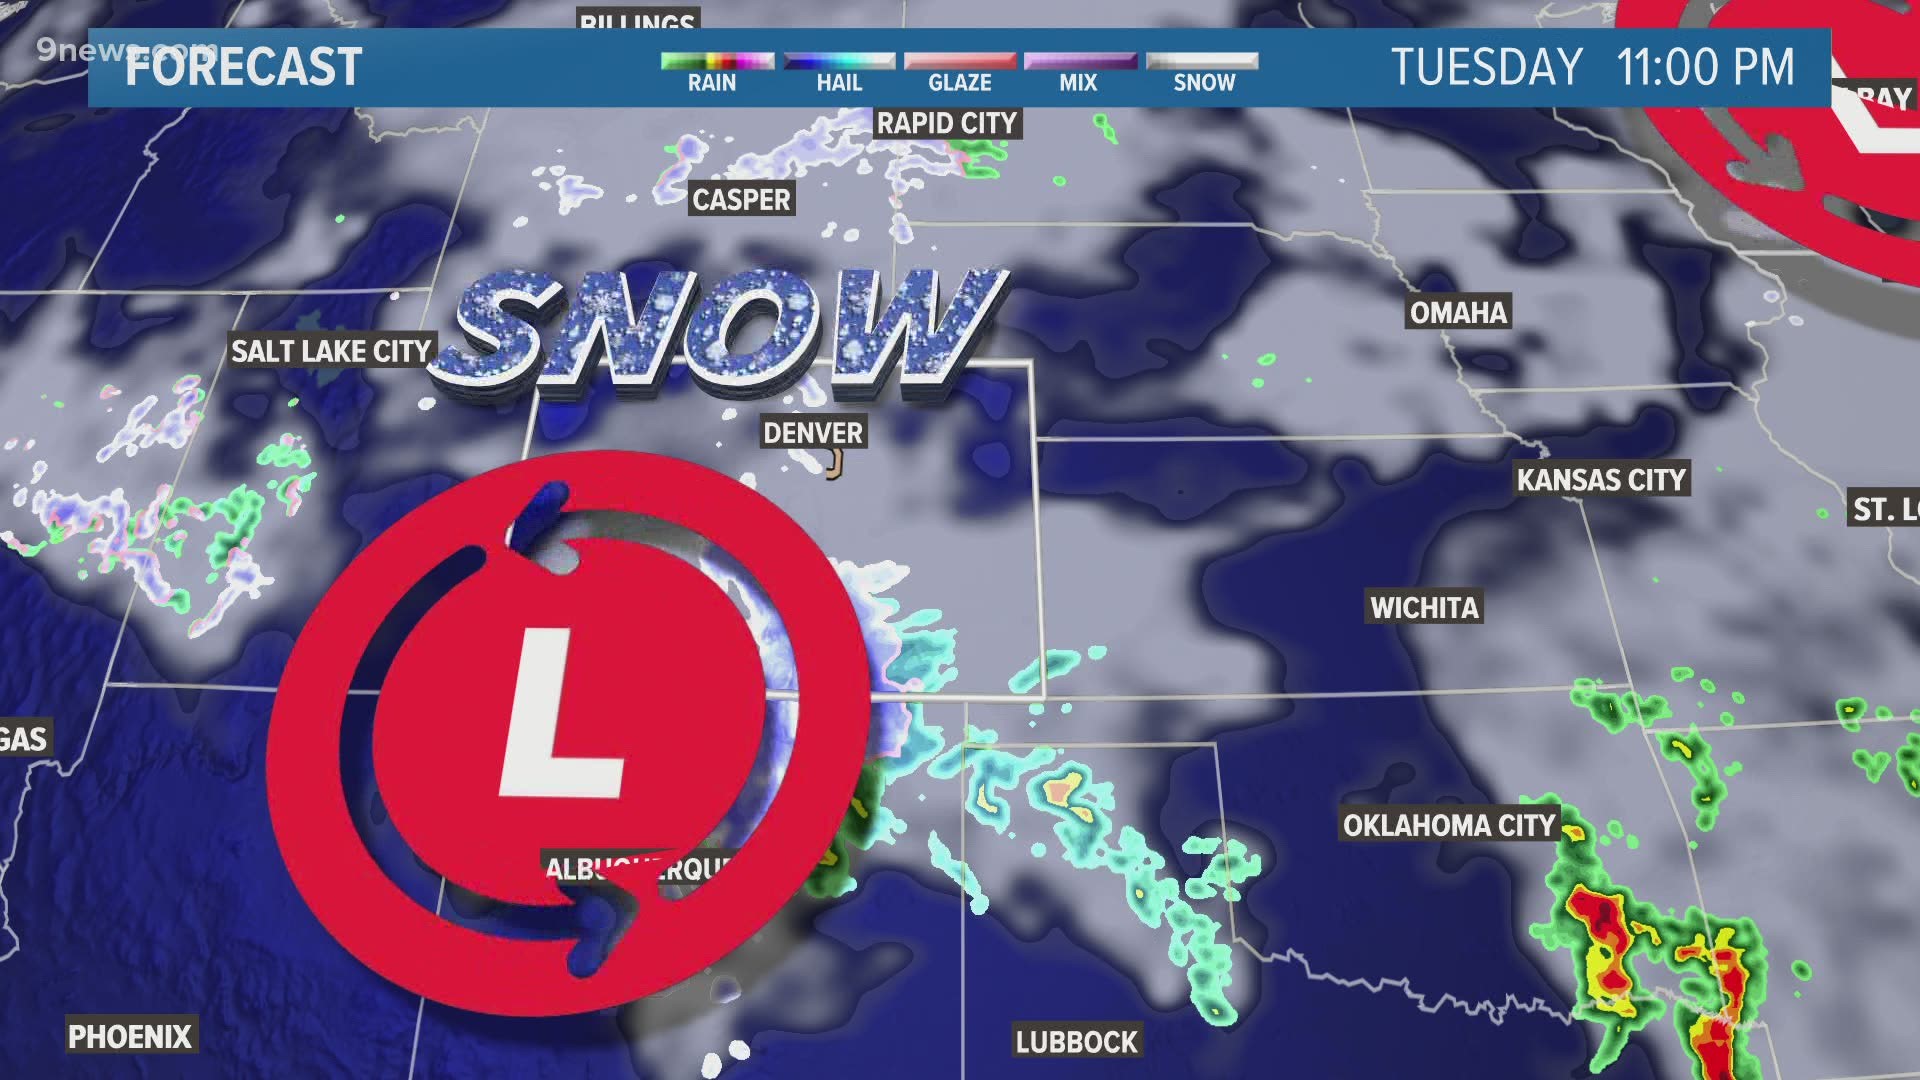 9NEWS Meteorologist Danielle Grant provided an update to the winter storm that pummeled Colorado and the Front Range.